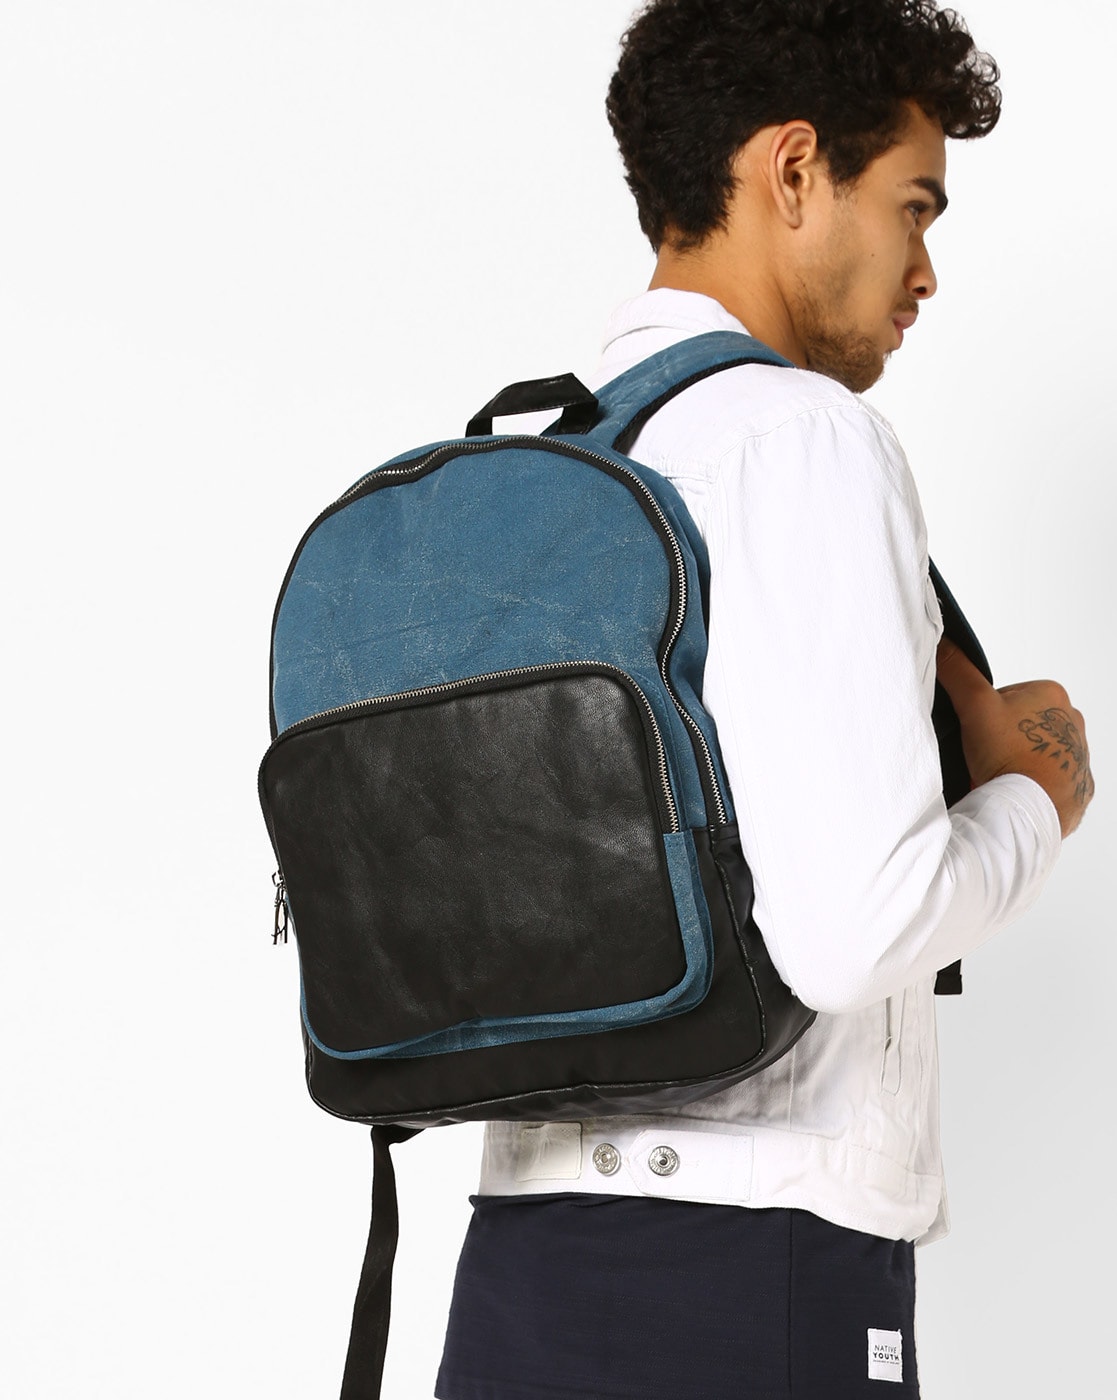 Backpack Denim - Blue Happiness - Blue backpack with smiley faces - Molo